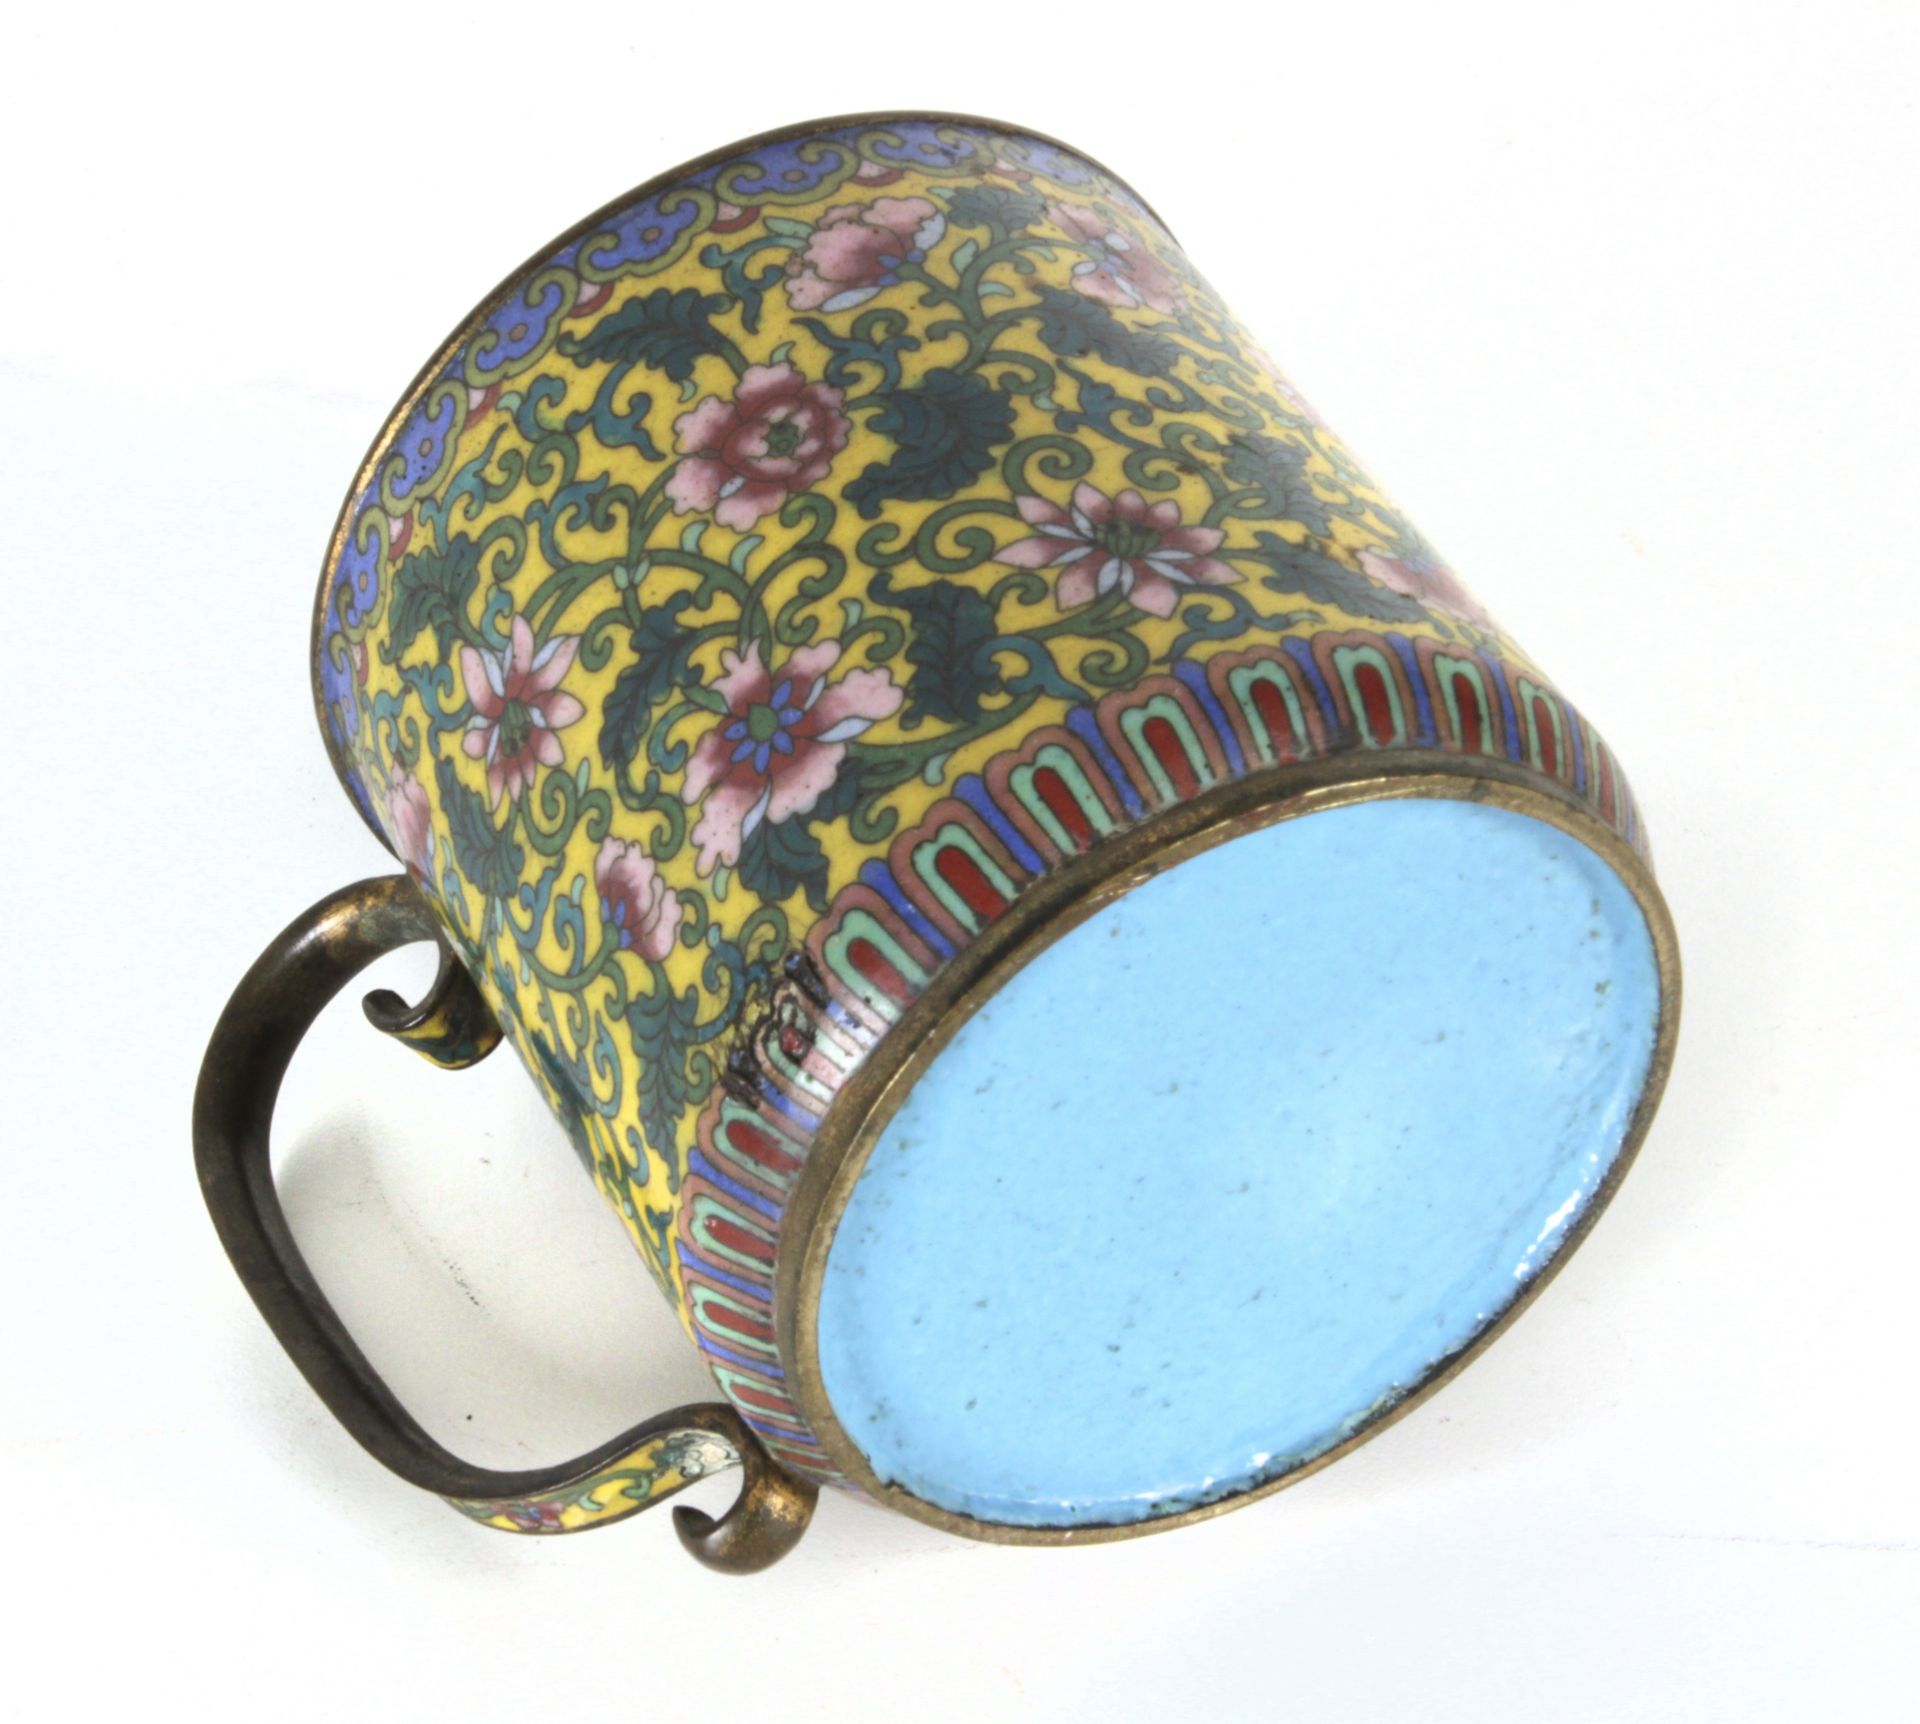 A first half of 20th century Chinese cup in copper with cloisonné enamel - Image 4 of 4